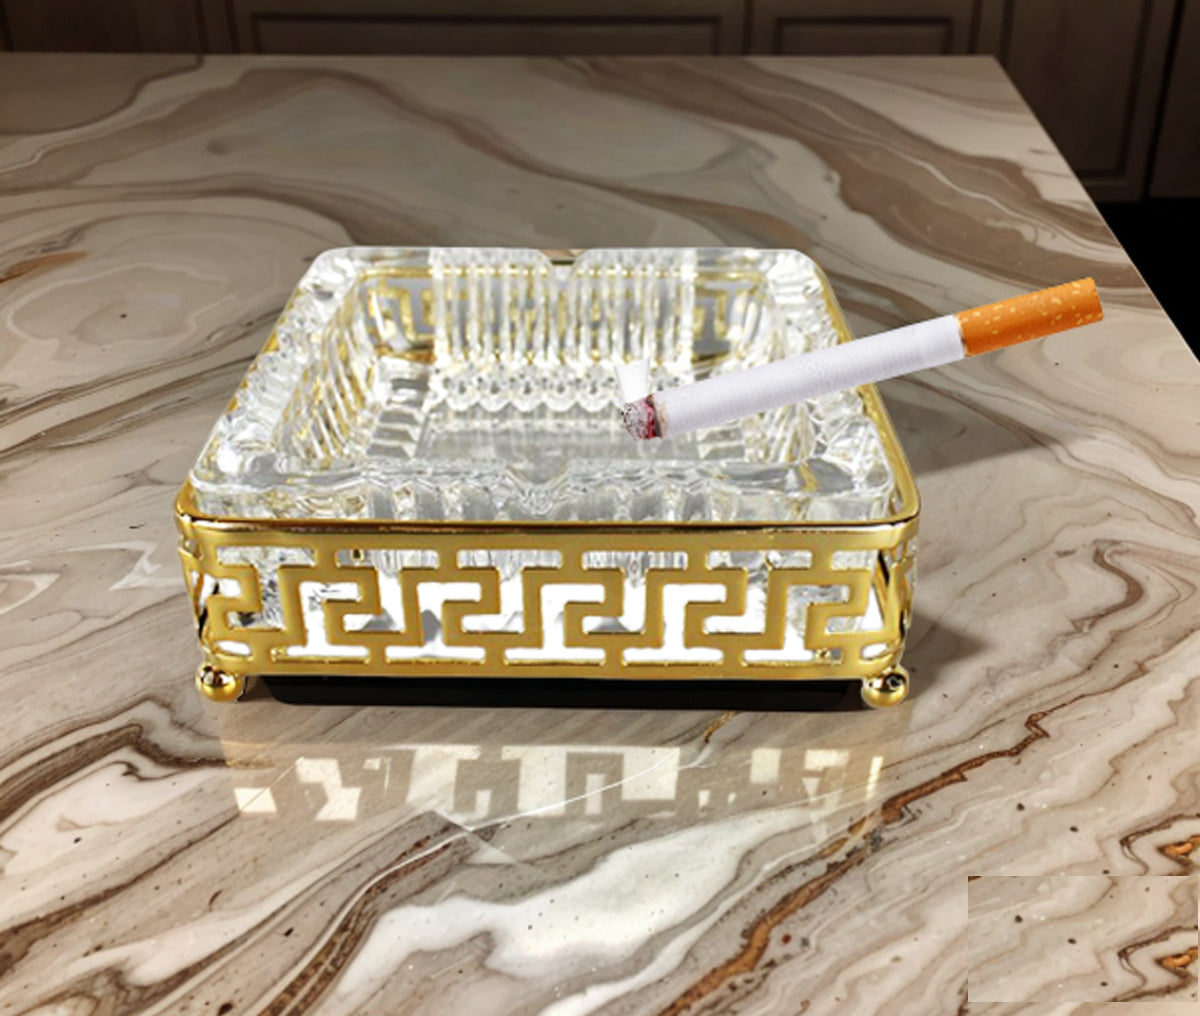 Golden Ashtray A Luxurious Addition to Your Home